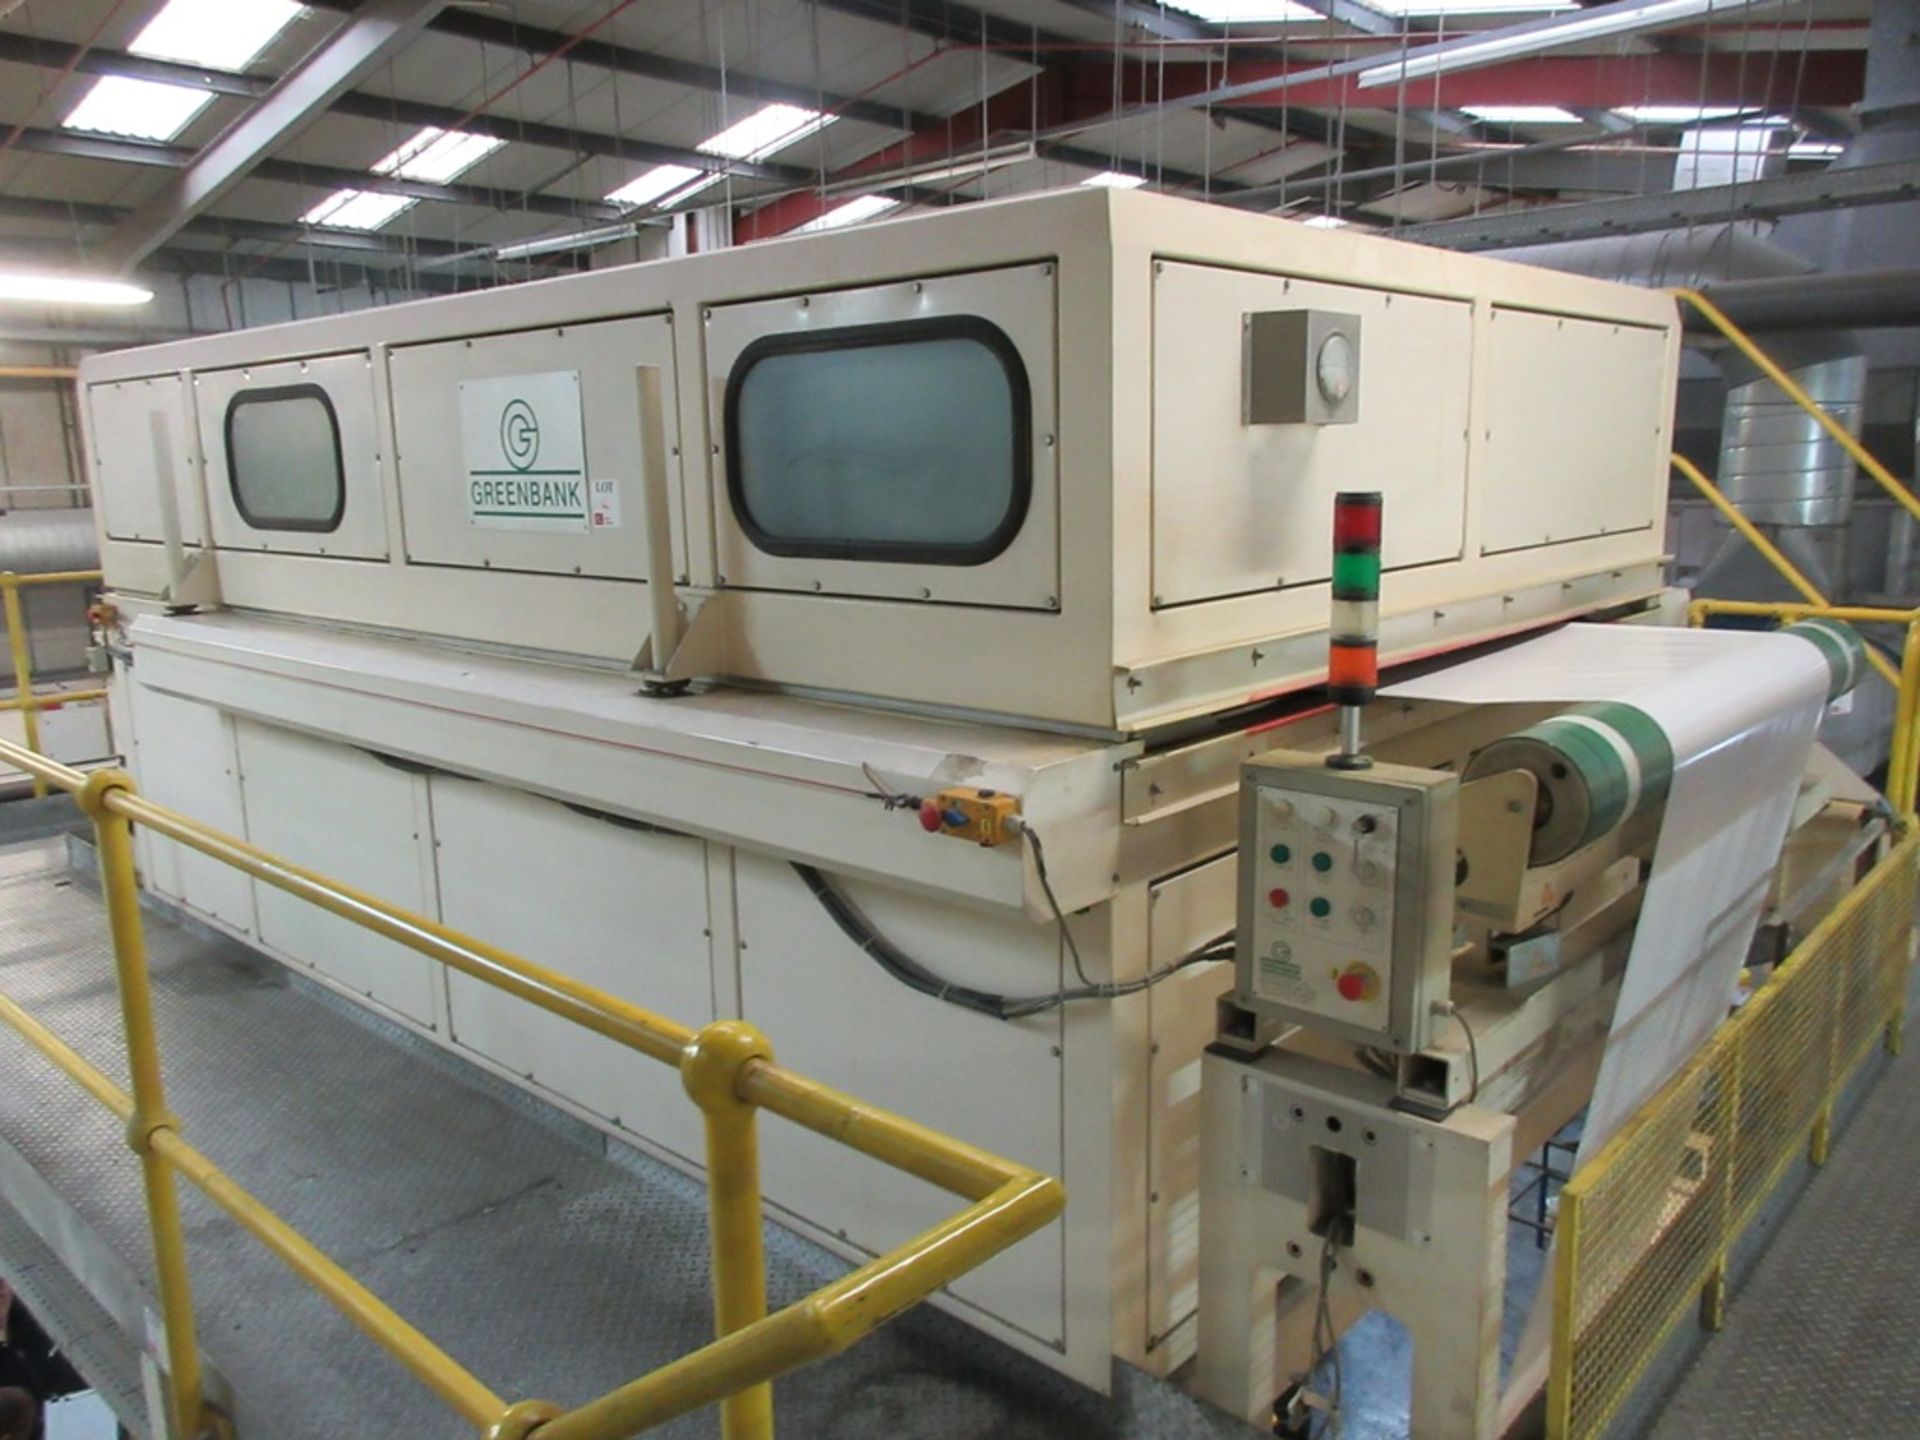 Greenbank primer rolling station and oven, contract ref: 10.226.0 (2000), approx. dimensions 6m x 3m - Image 13 of 38